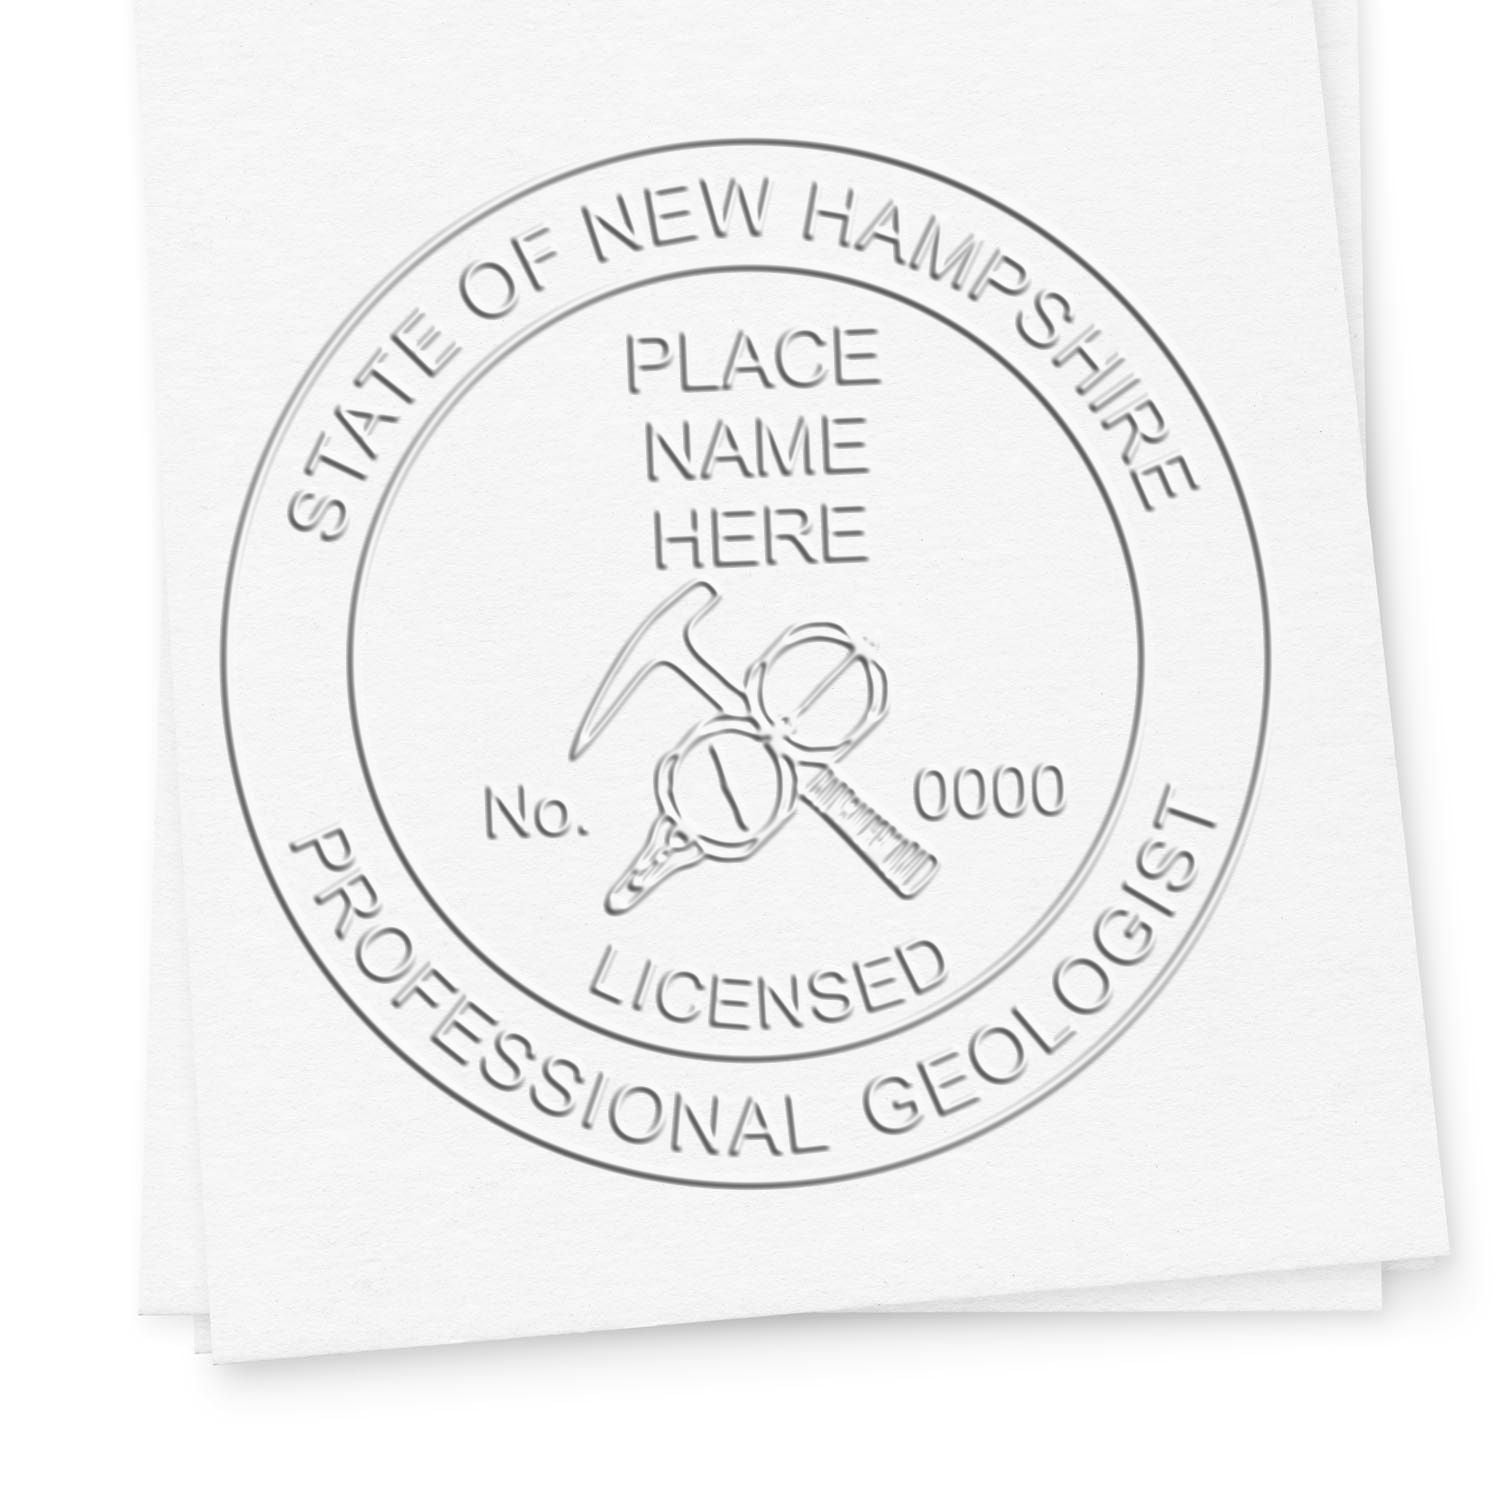 The main image for the Handheld New Hampshire Professional Geologist Embosser depicting a sample of the imprint and imprint sample